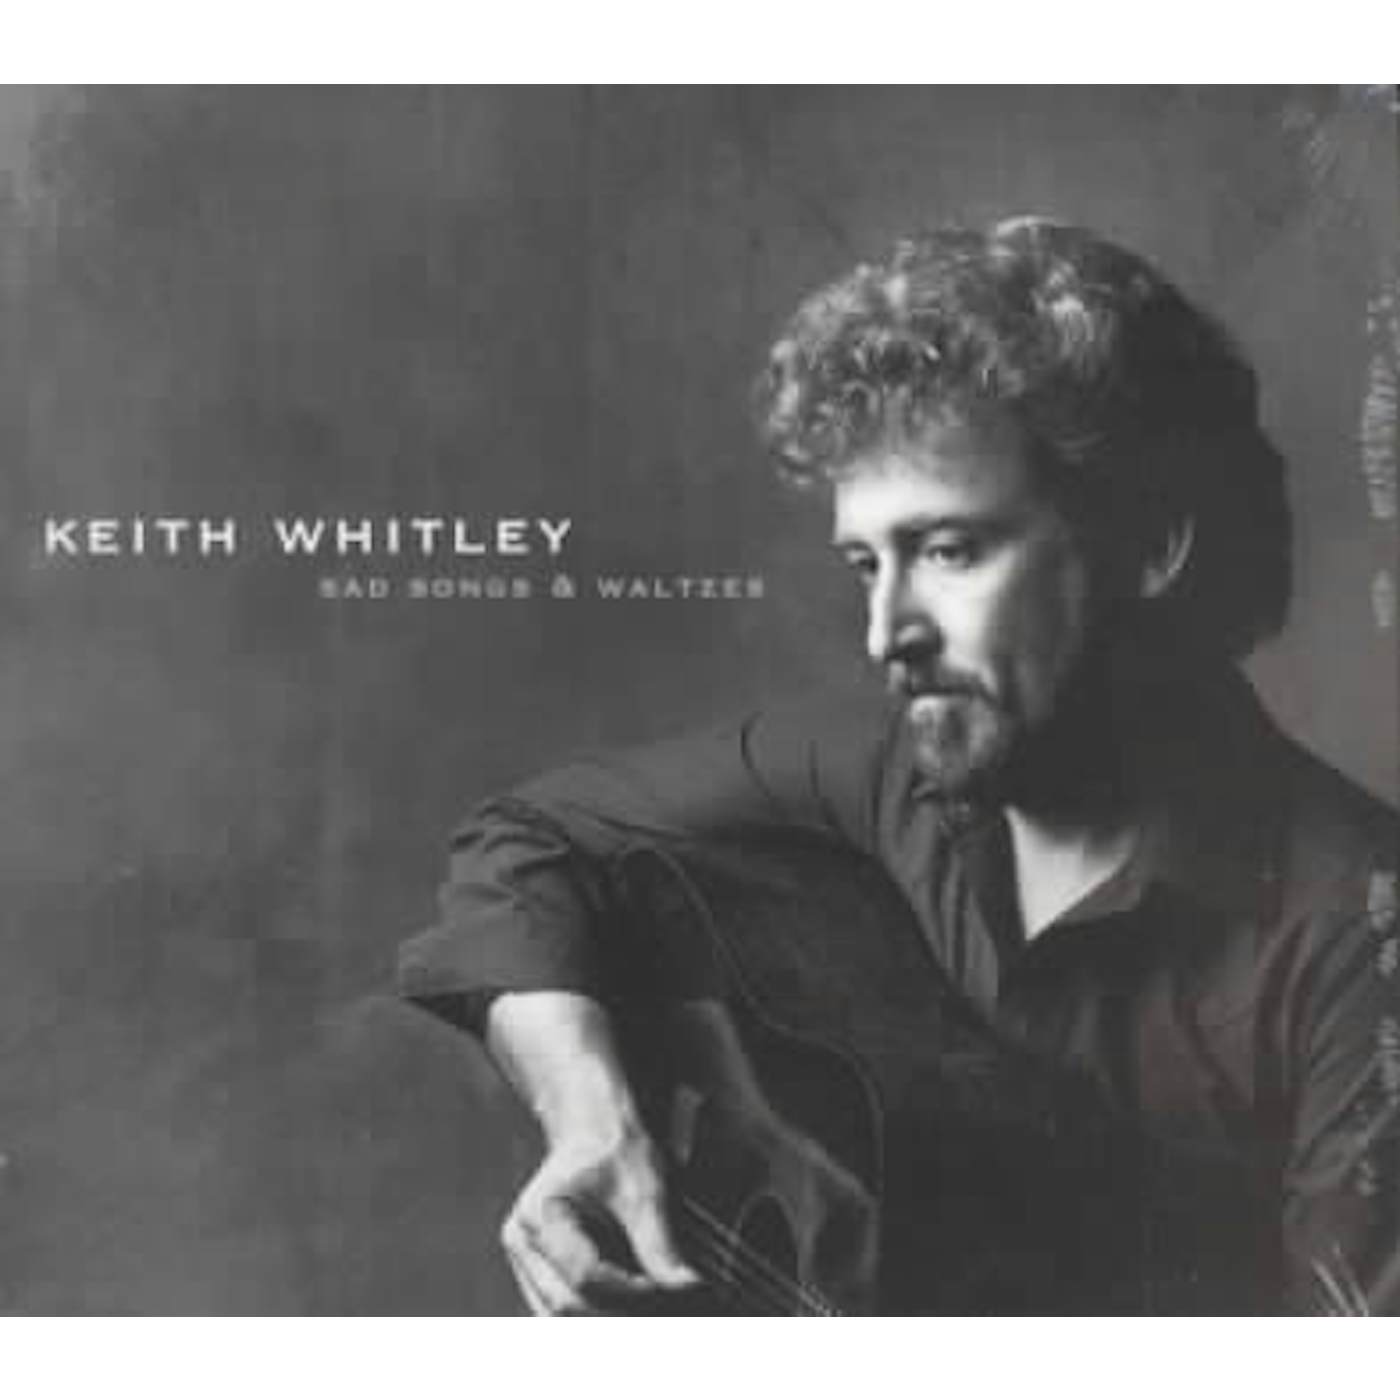 Keith Whitley Sad Songs & Waltzes CD